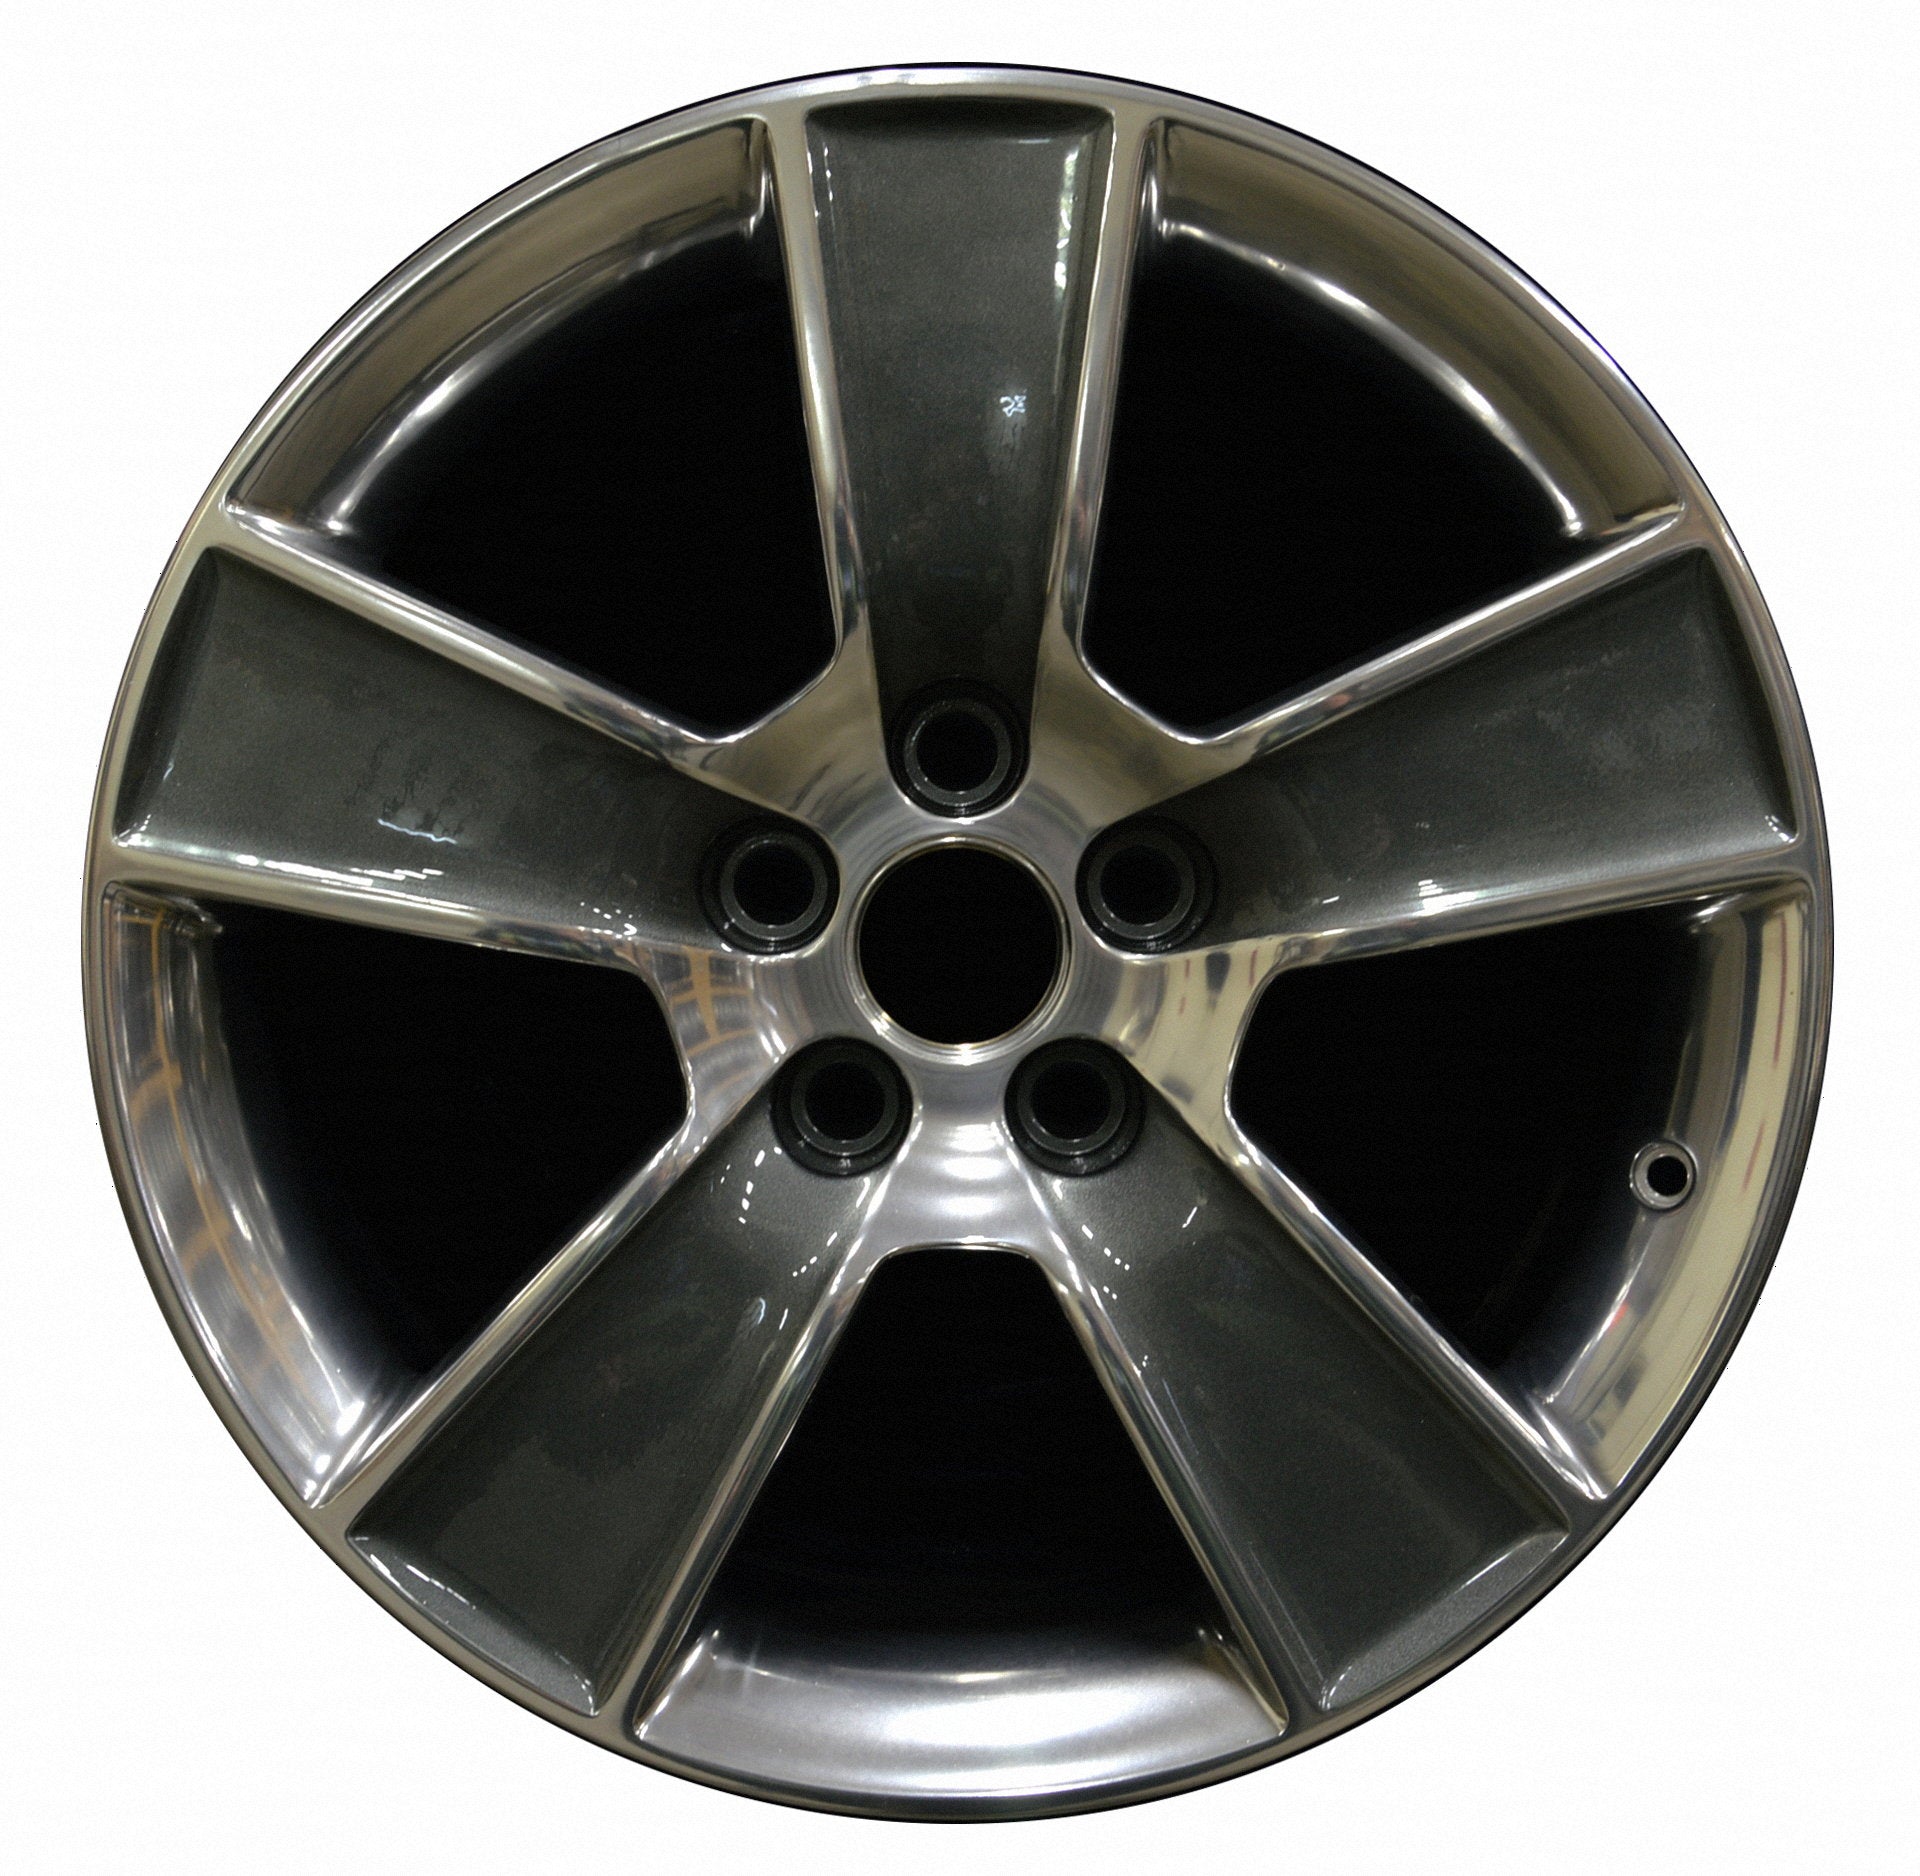 Ford Mustang  2006, 2007, 2008, 2009 Factory OEM Car Wheel Size 18x8.5 Alloy WAO.3647.LC36.POL